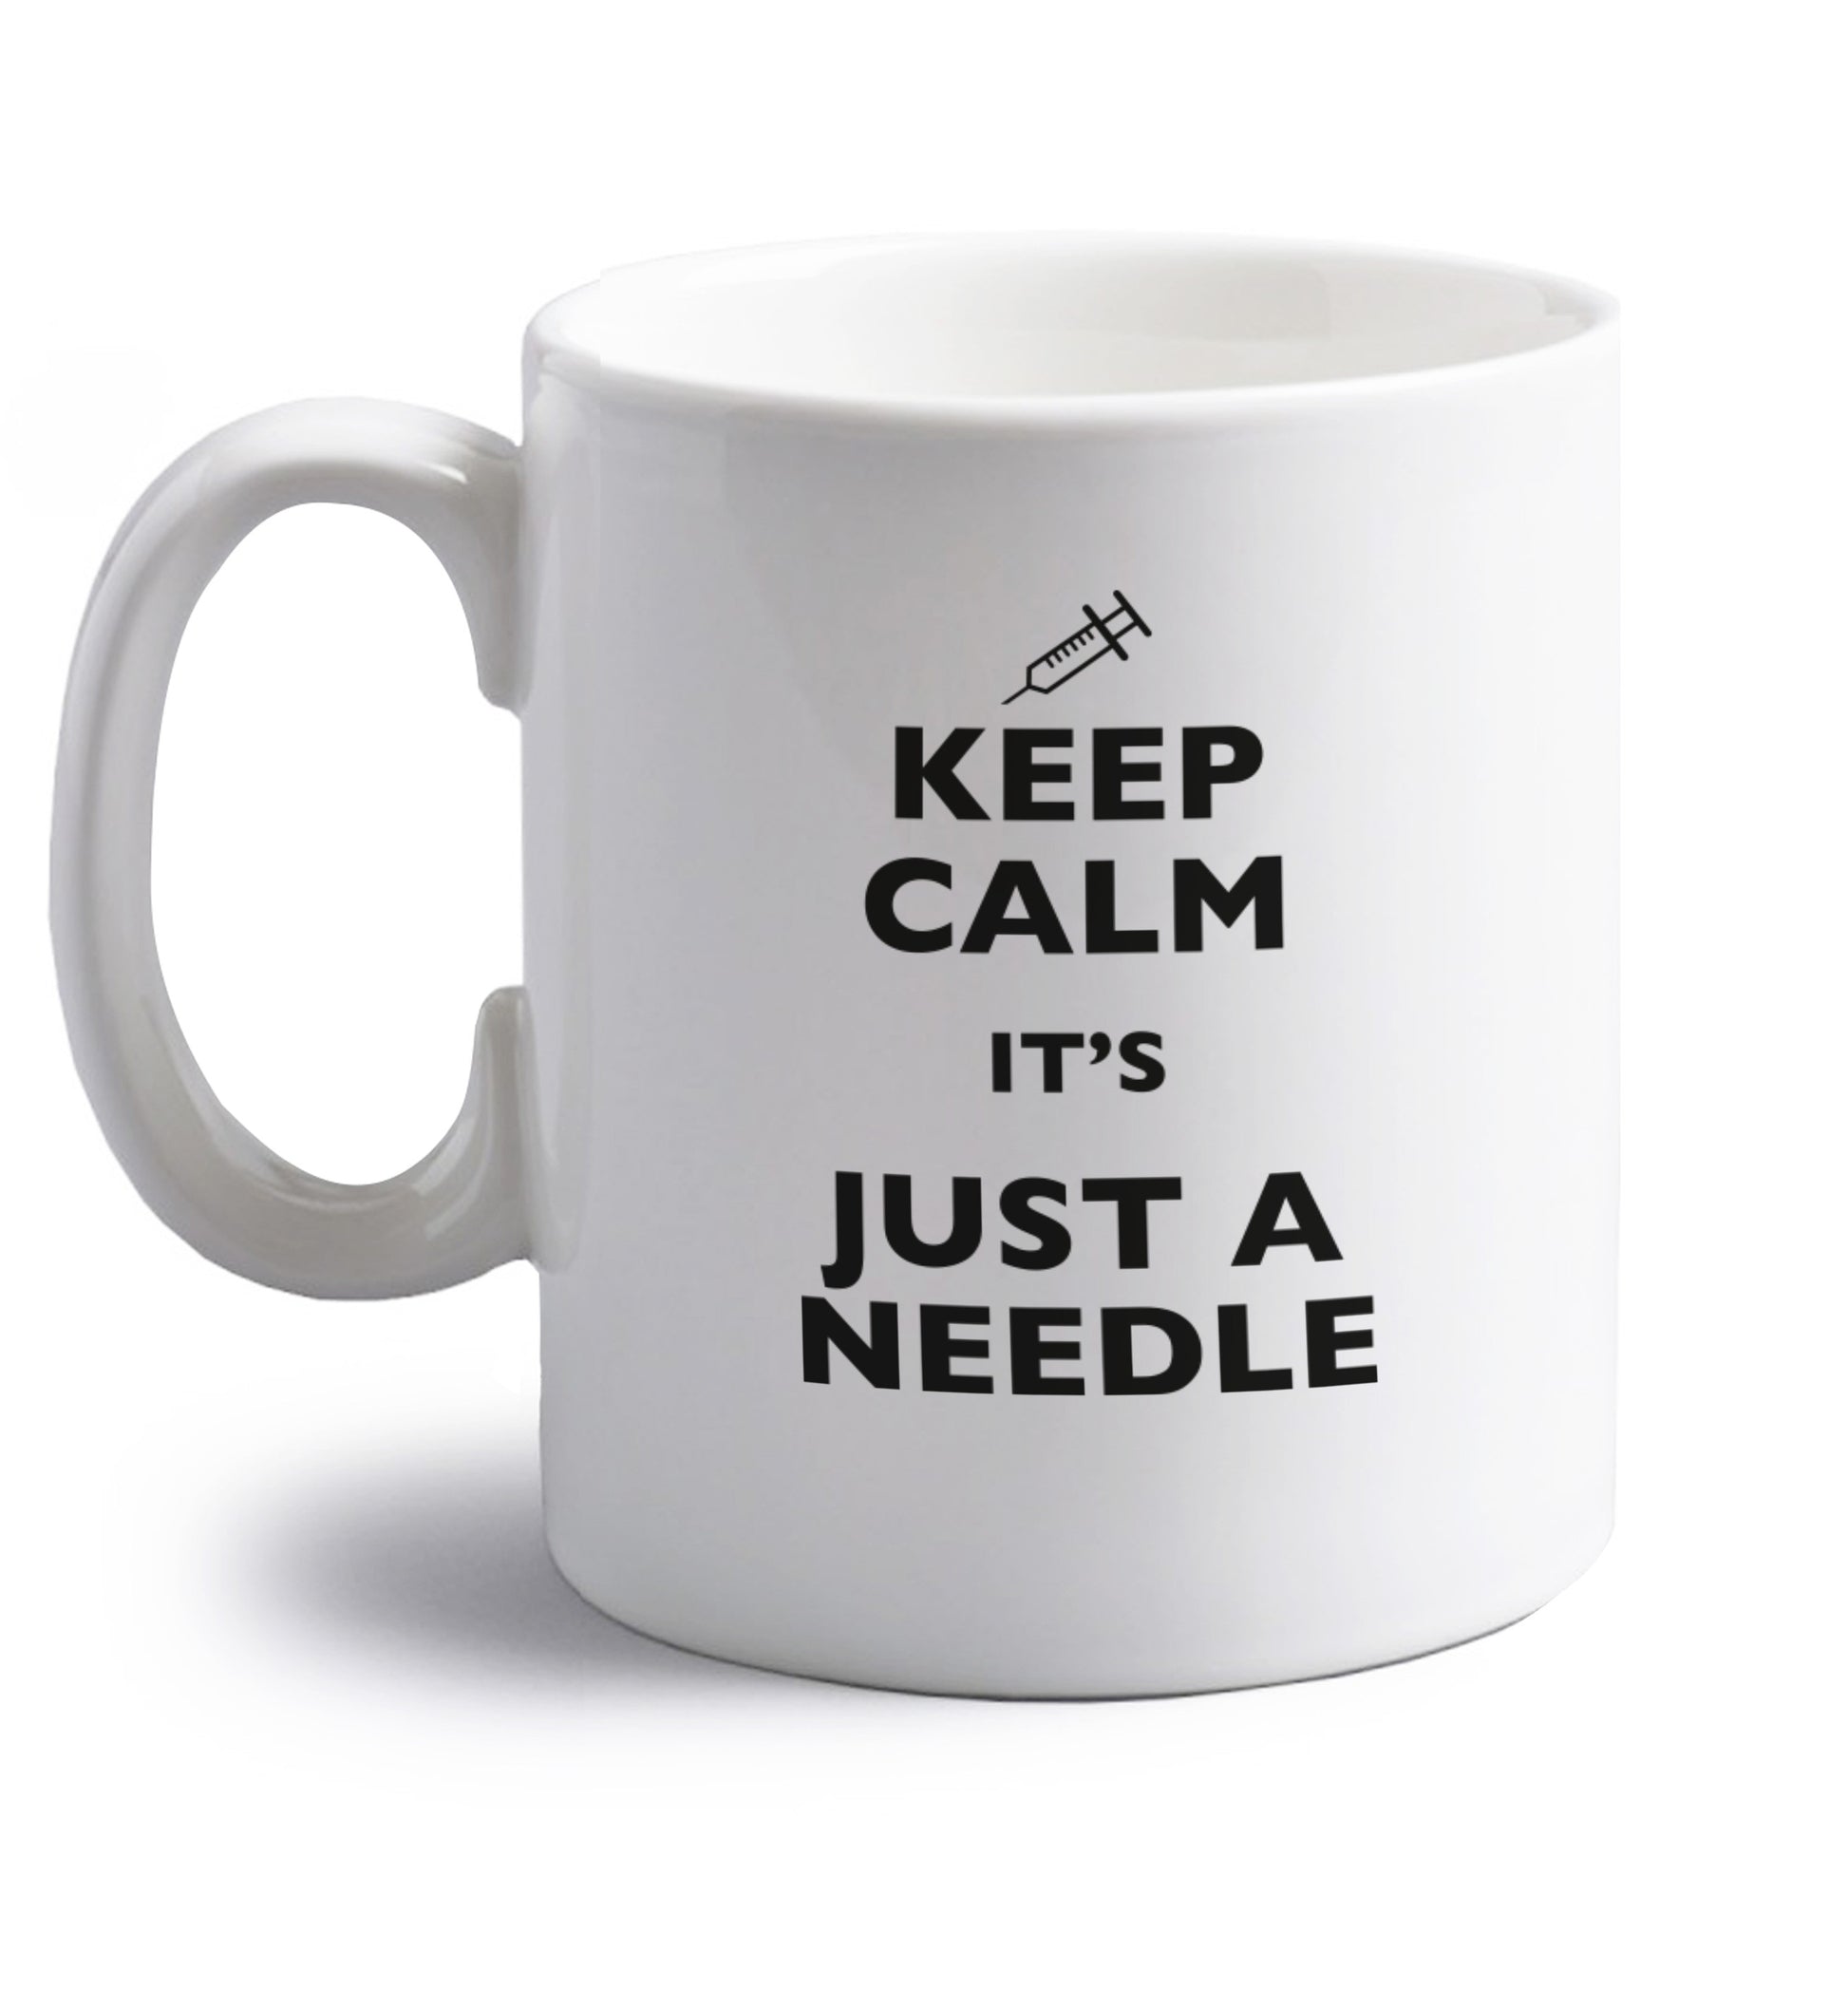 Keep calm it's only a needle right handed white ceramic mug 